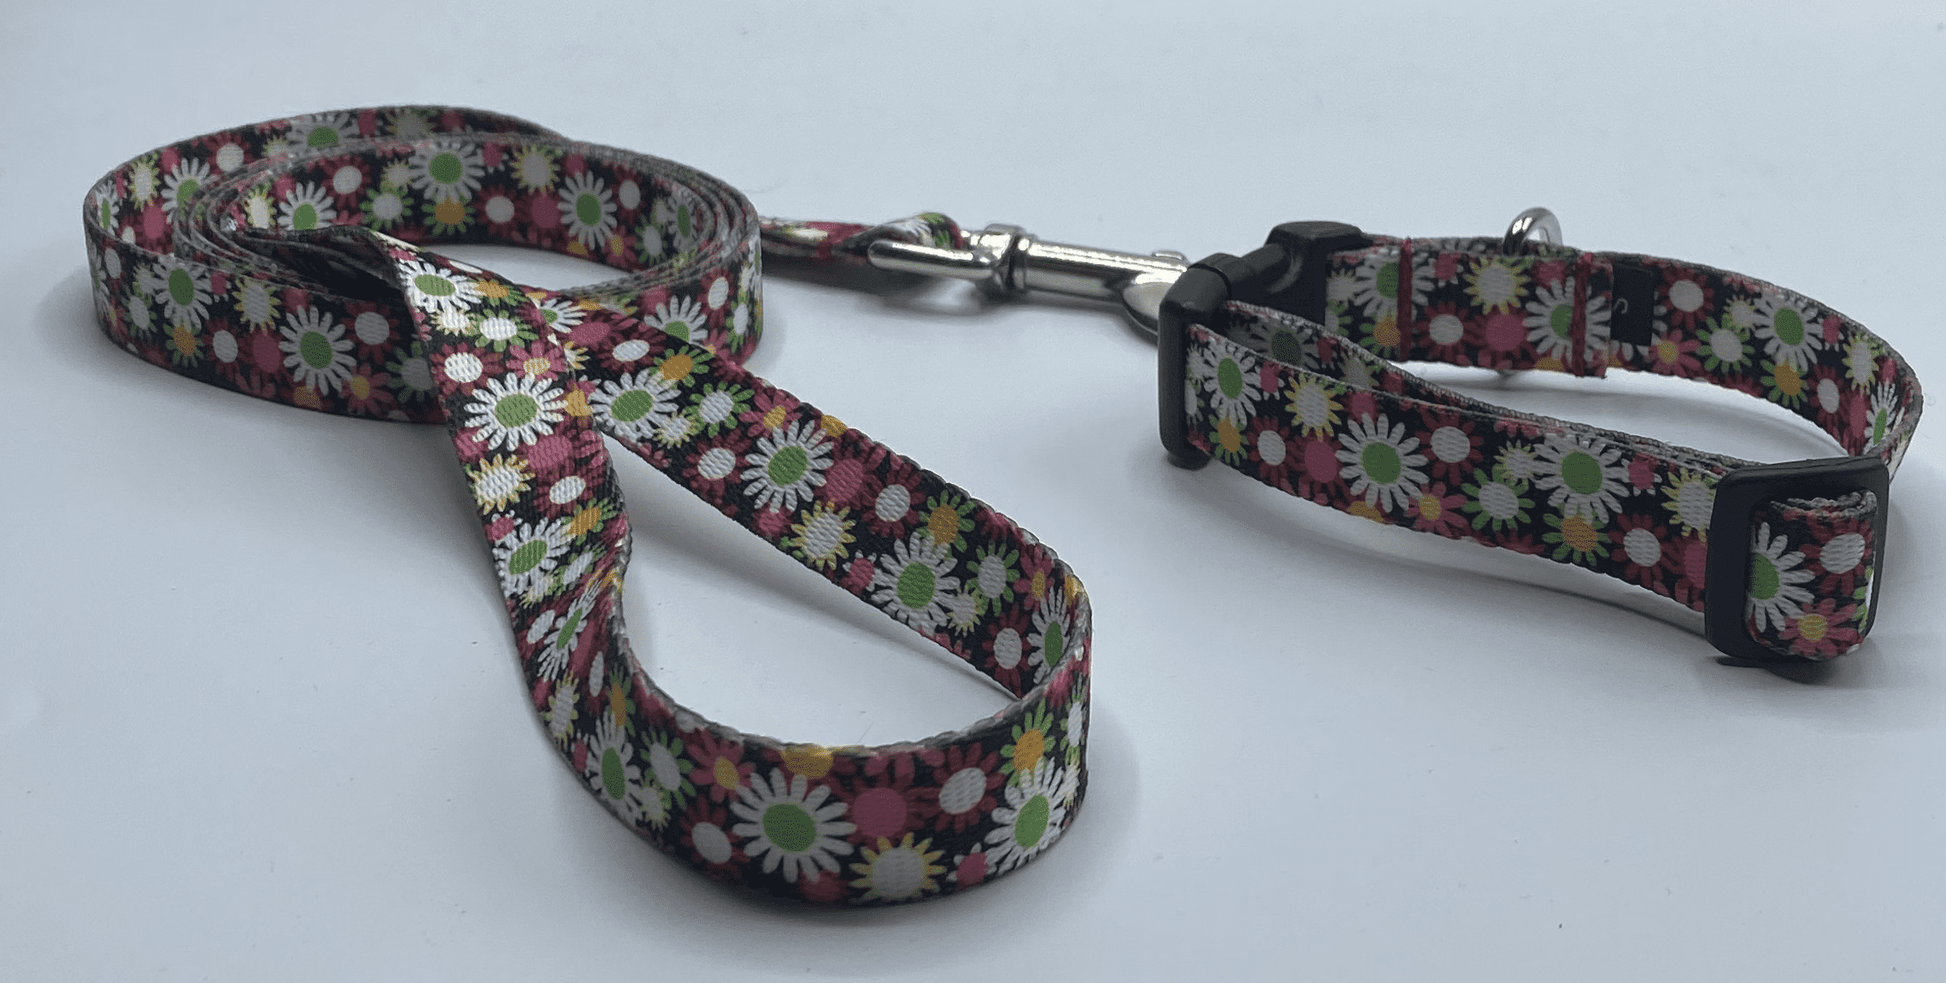 Flower Pop Dog Collars or leads (5/8" wide).